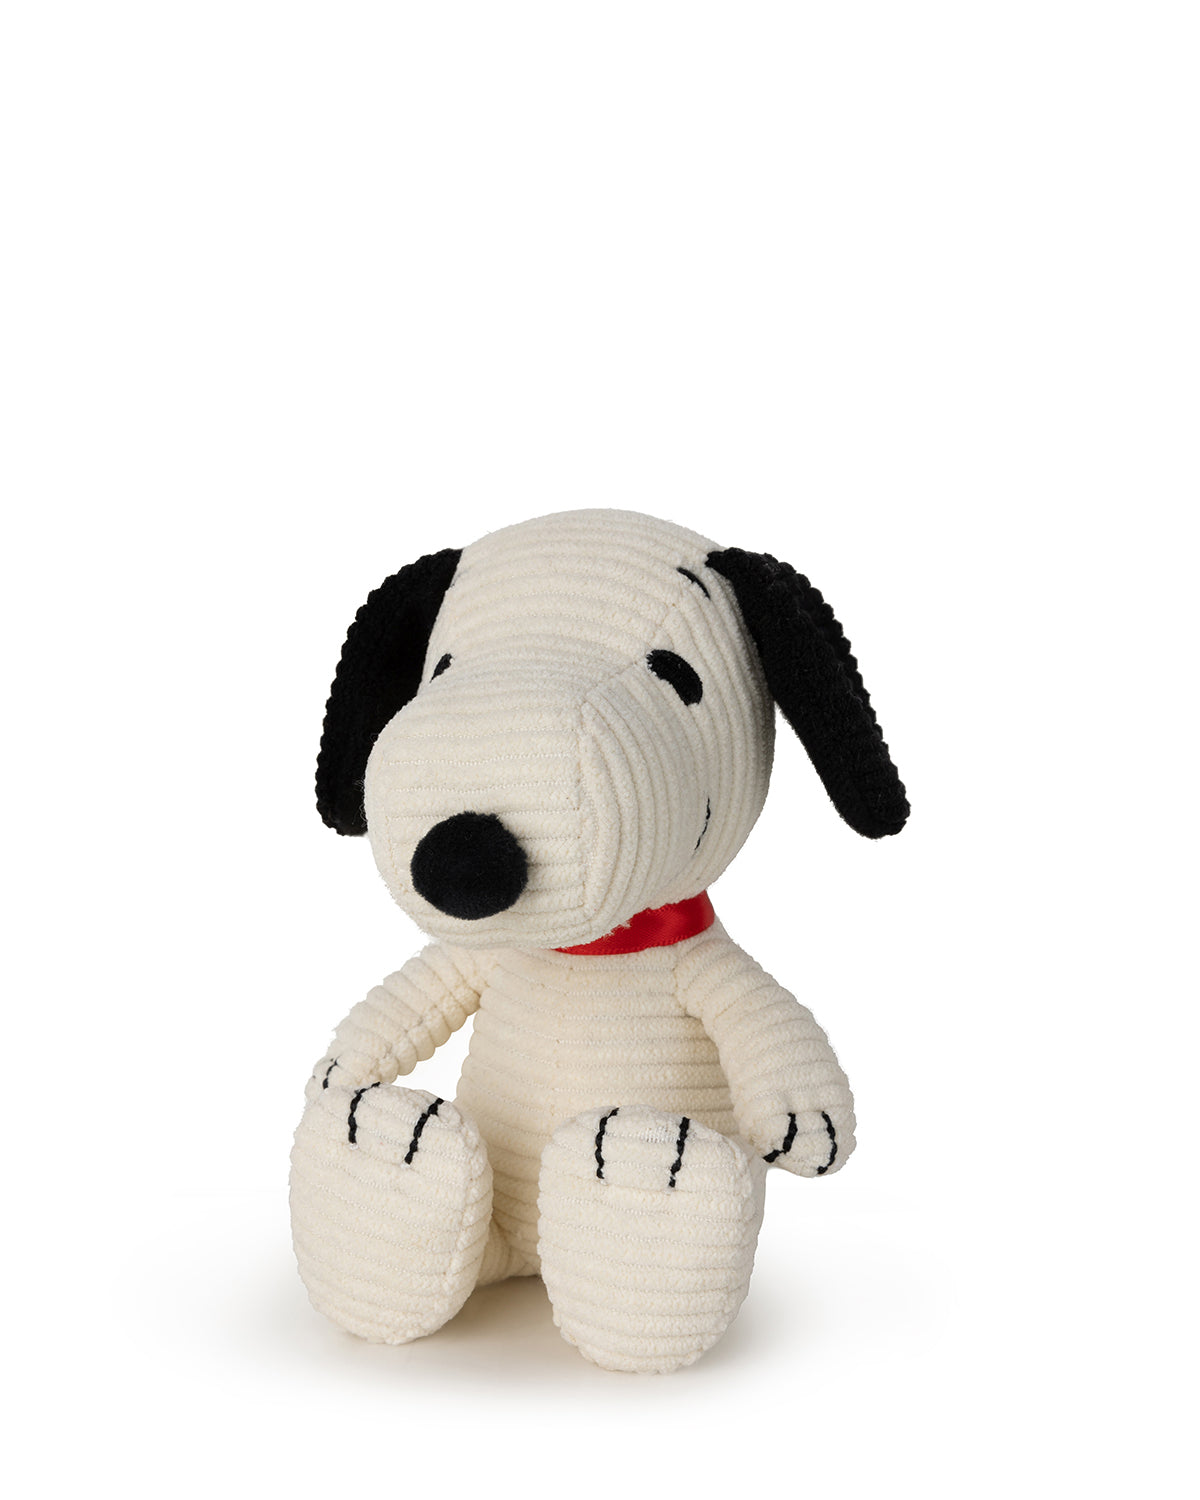 Snoopy Plush Toy - Special Order